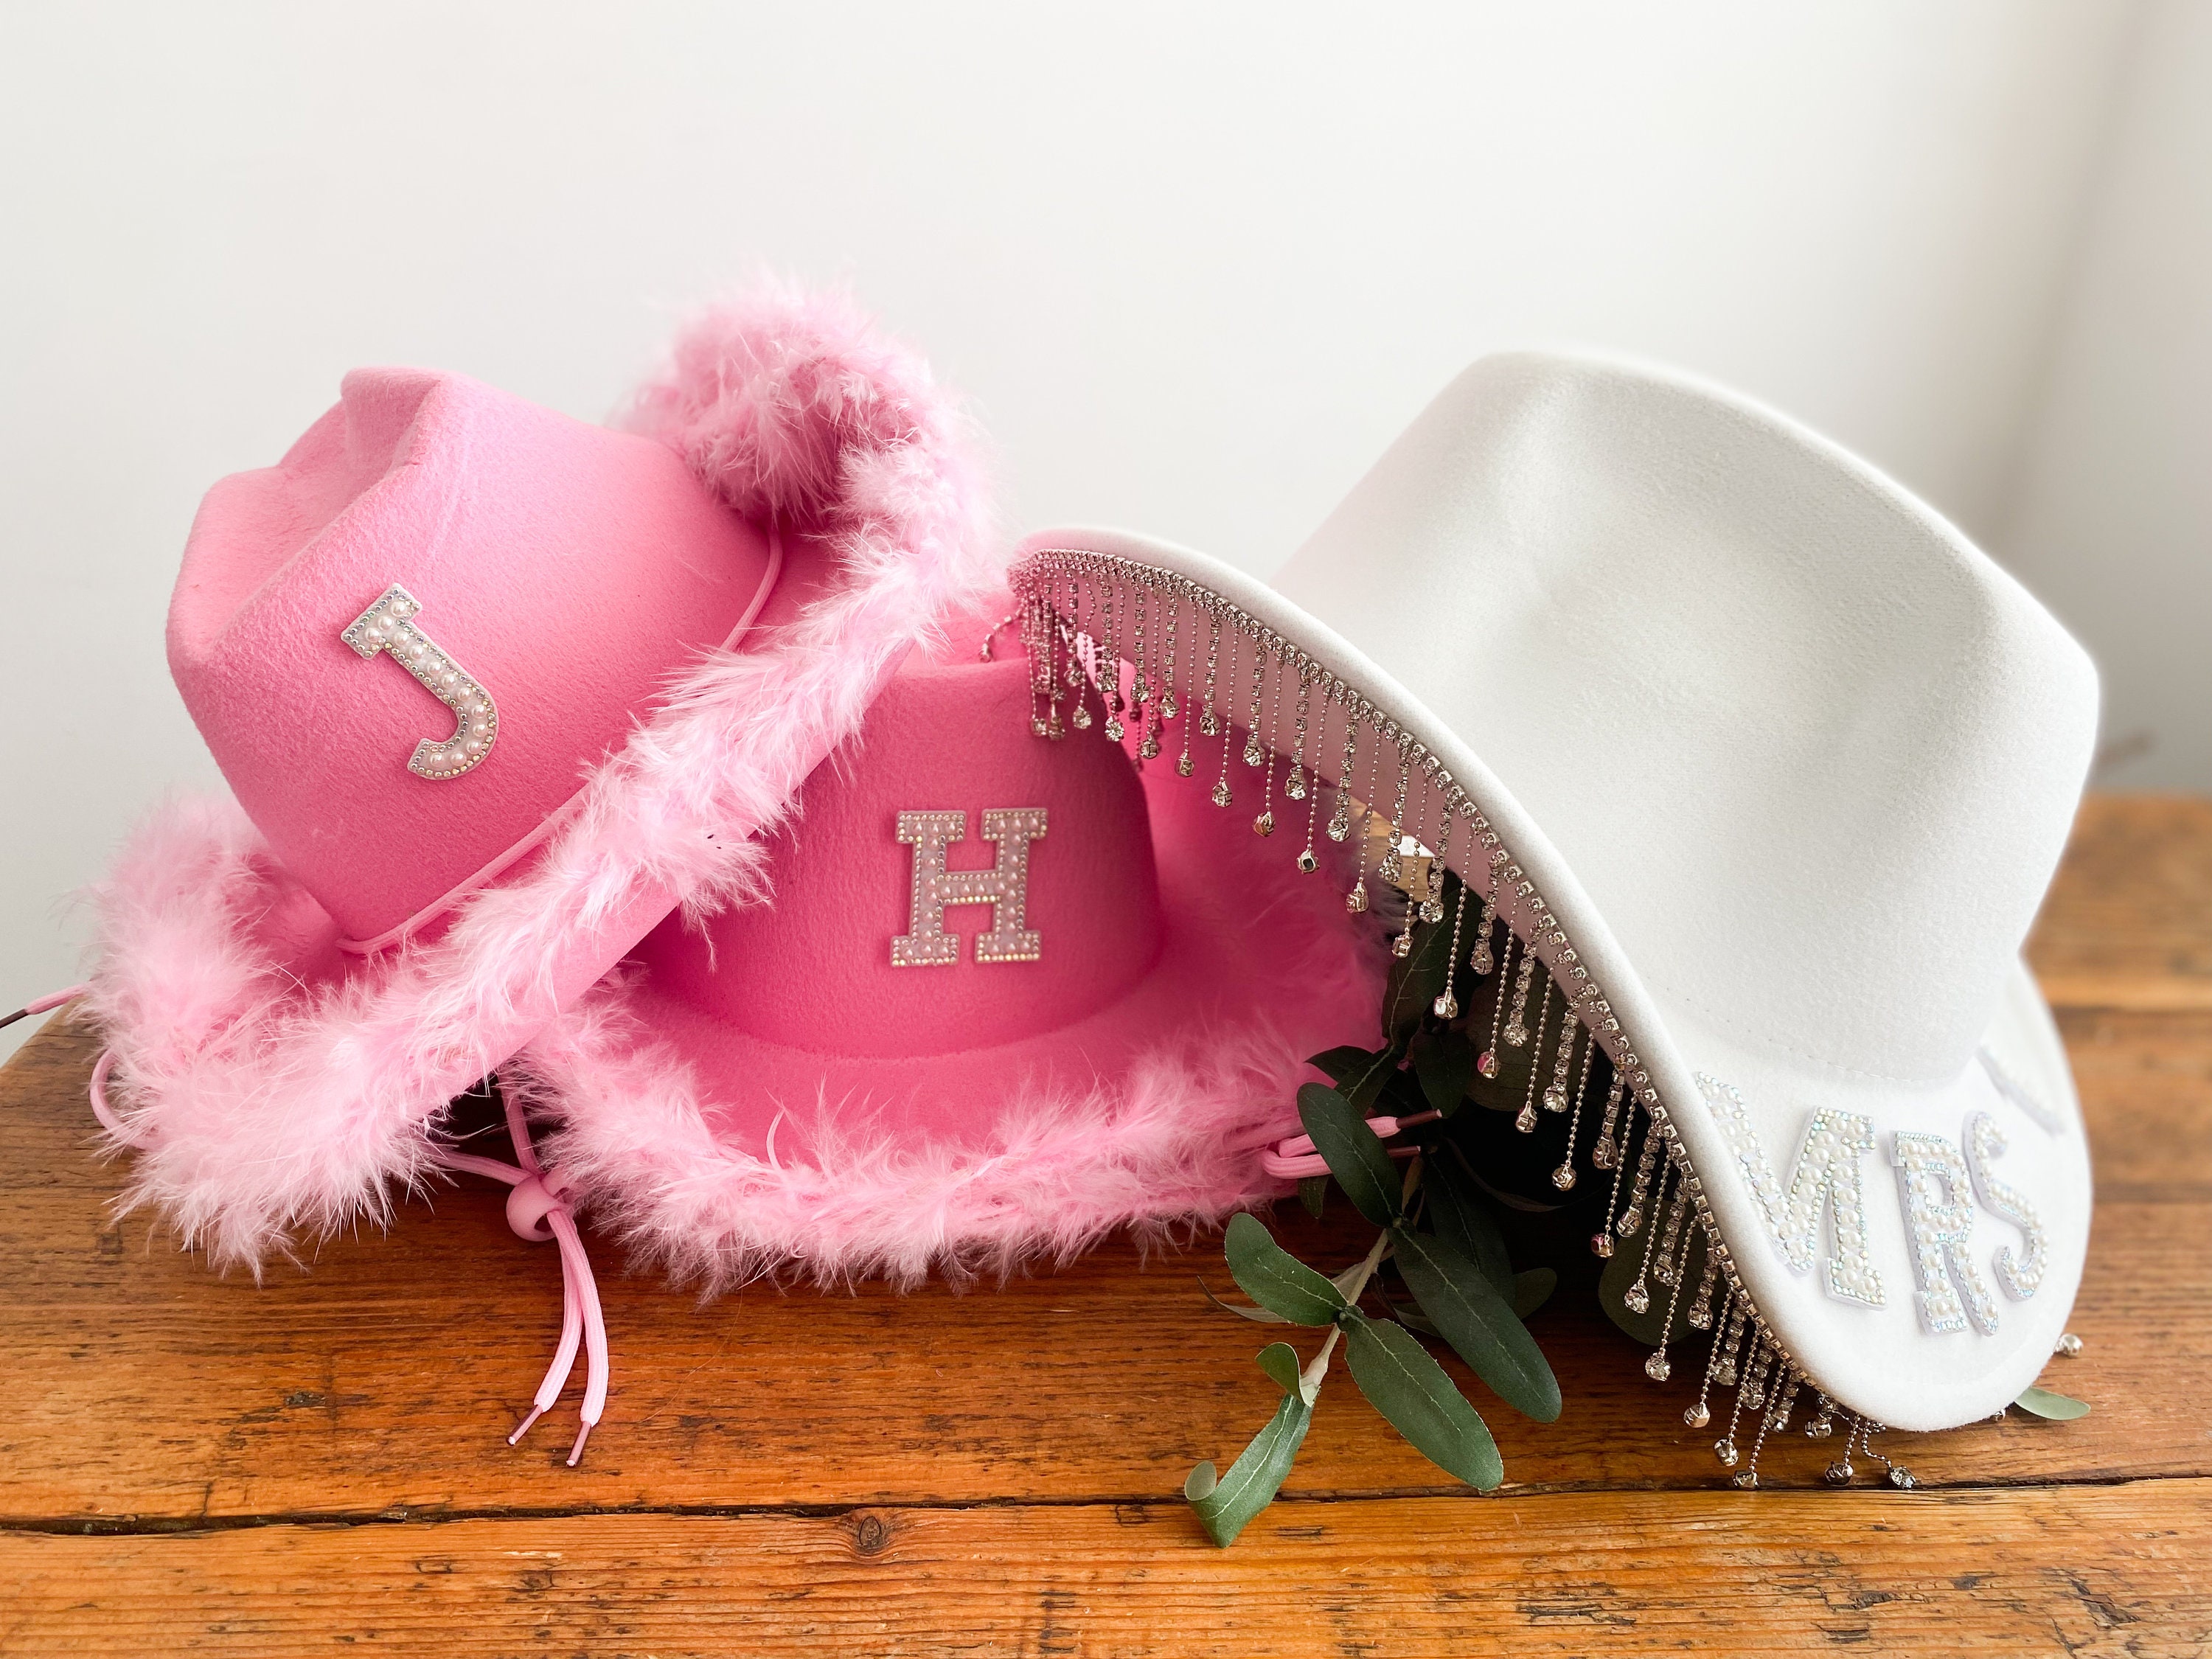 Winter Savings !40g Turkey Feathers Hat with Feathers Boa Novelty Pink  Feather Blinking Rhinestone Cowboy Hat Dancing Wedding Crafting up Wedding